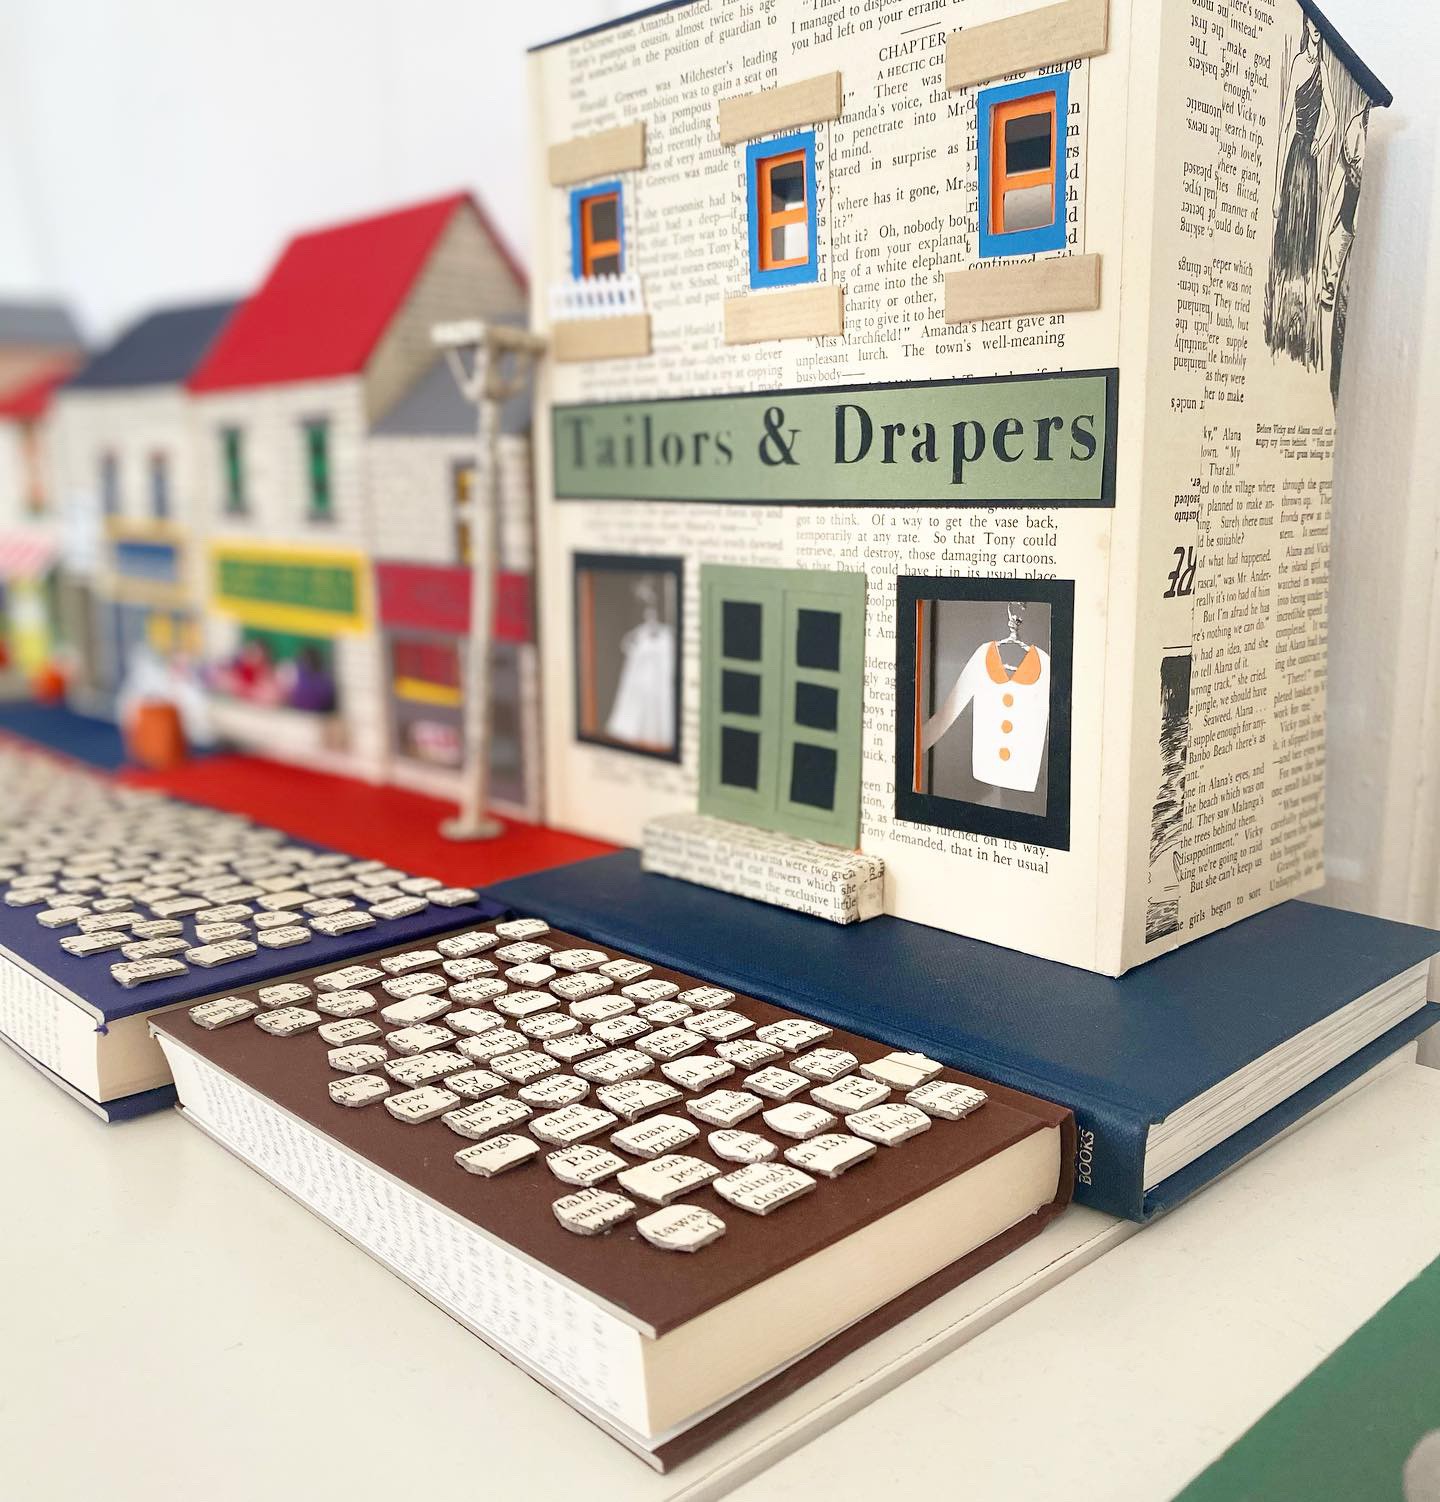 Model houses and shops made from books